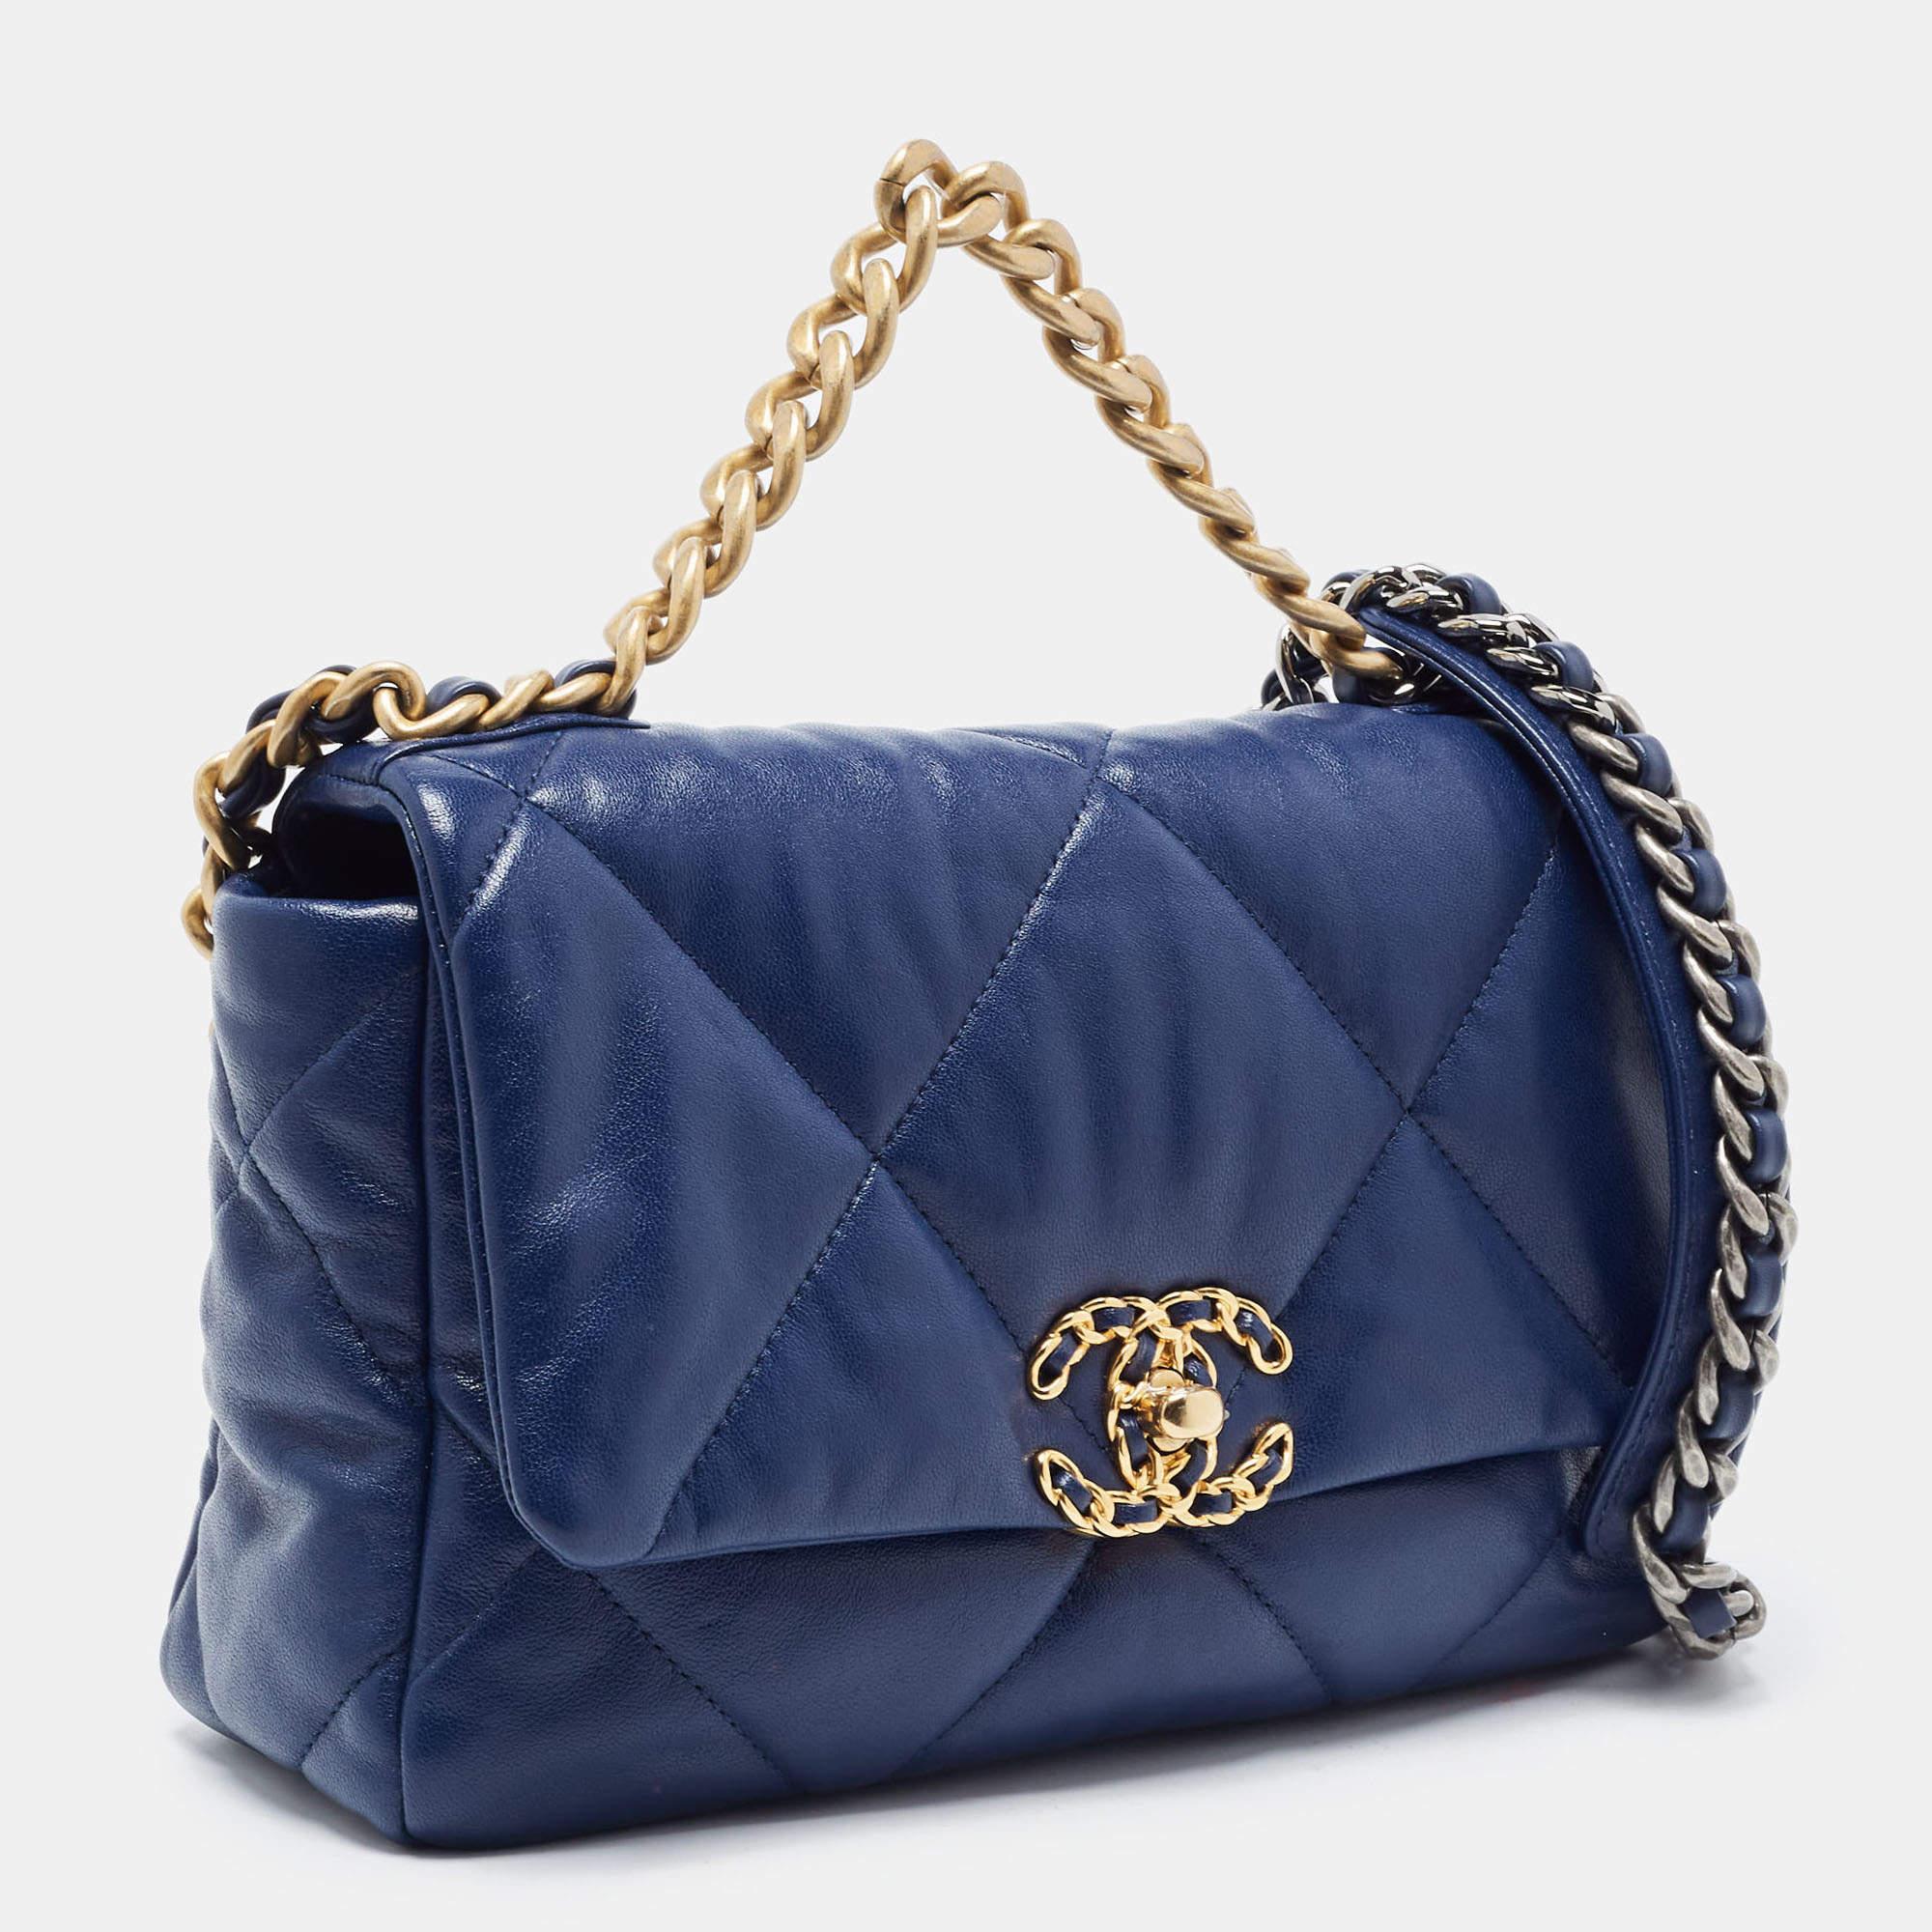 Chanel Blue Quilted Leather Medium 19 Flap Bag In Excellent Condition For Sale In Dubai, Al Qouz 2